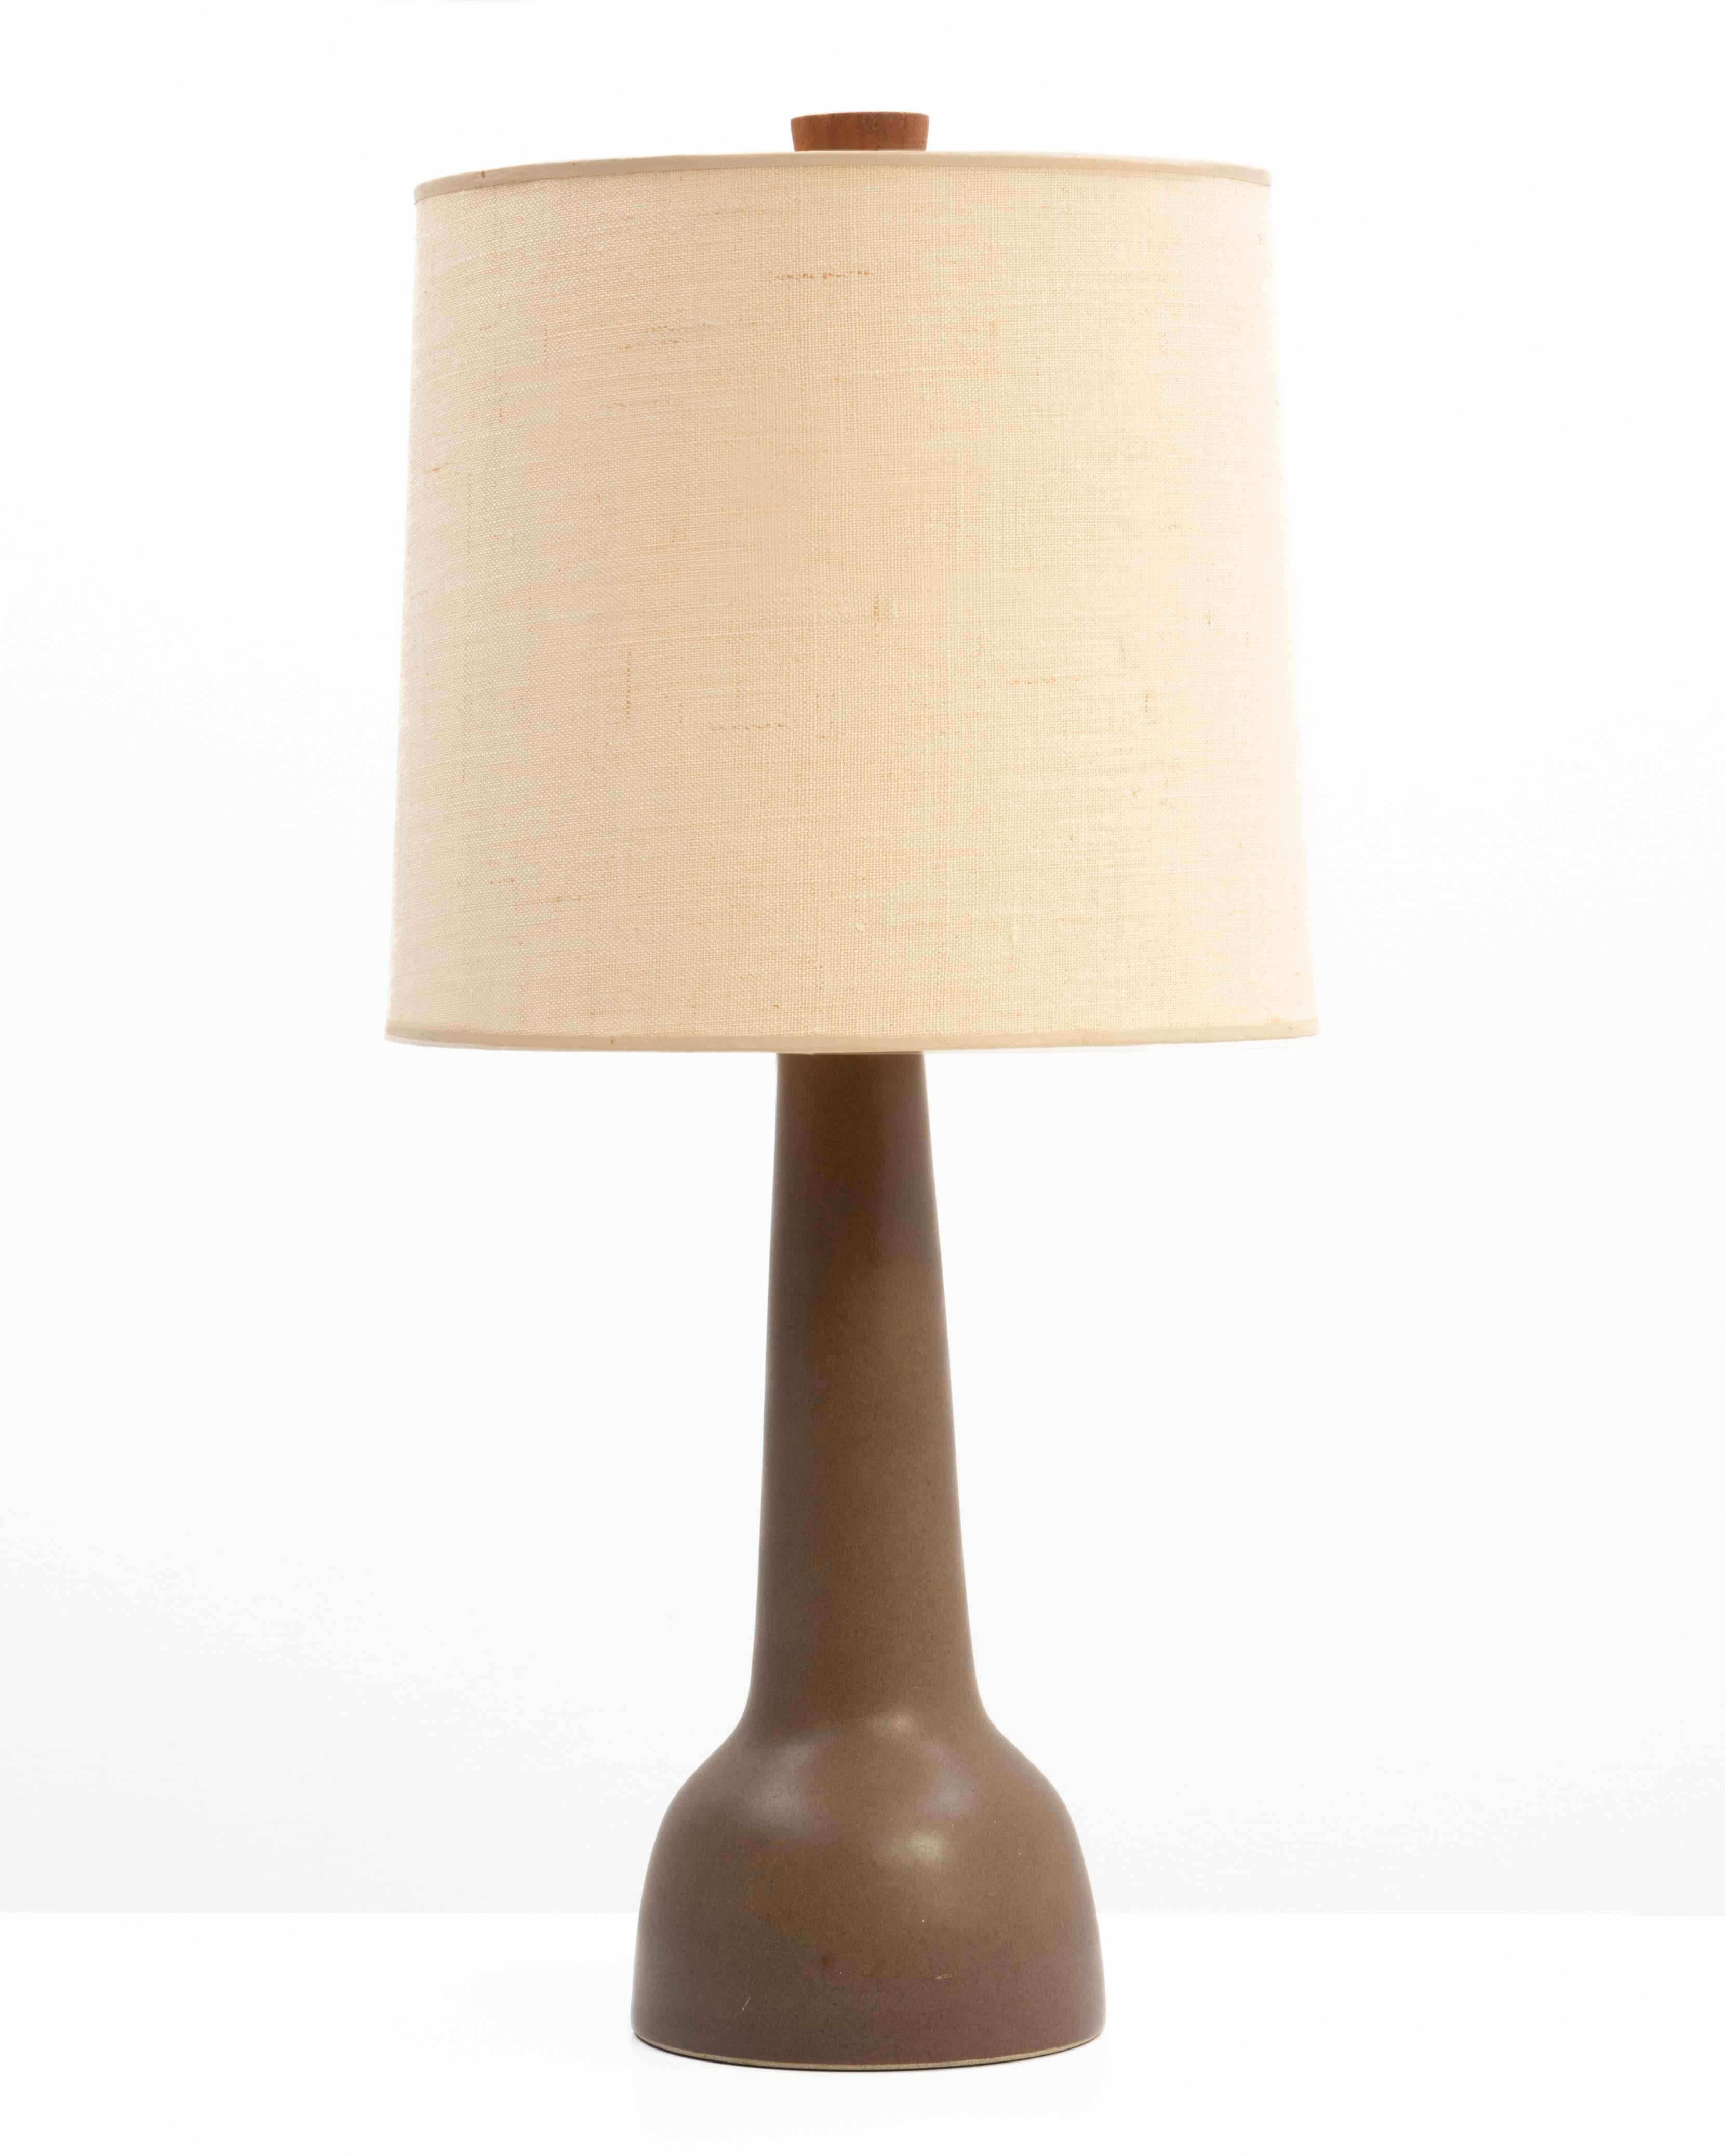 A Gordon & Jane Martz for Marshall Studios ceramic table lamp in a matte brown finely speckled glaze. The lamp retains the original shade (a bit worn so not included in the sale) and the original walnut finial. The shade is 10.75